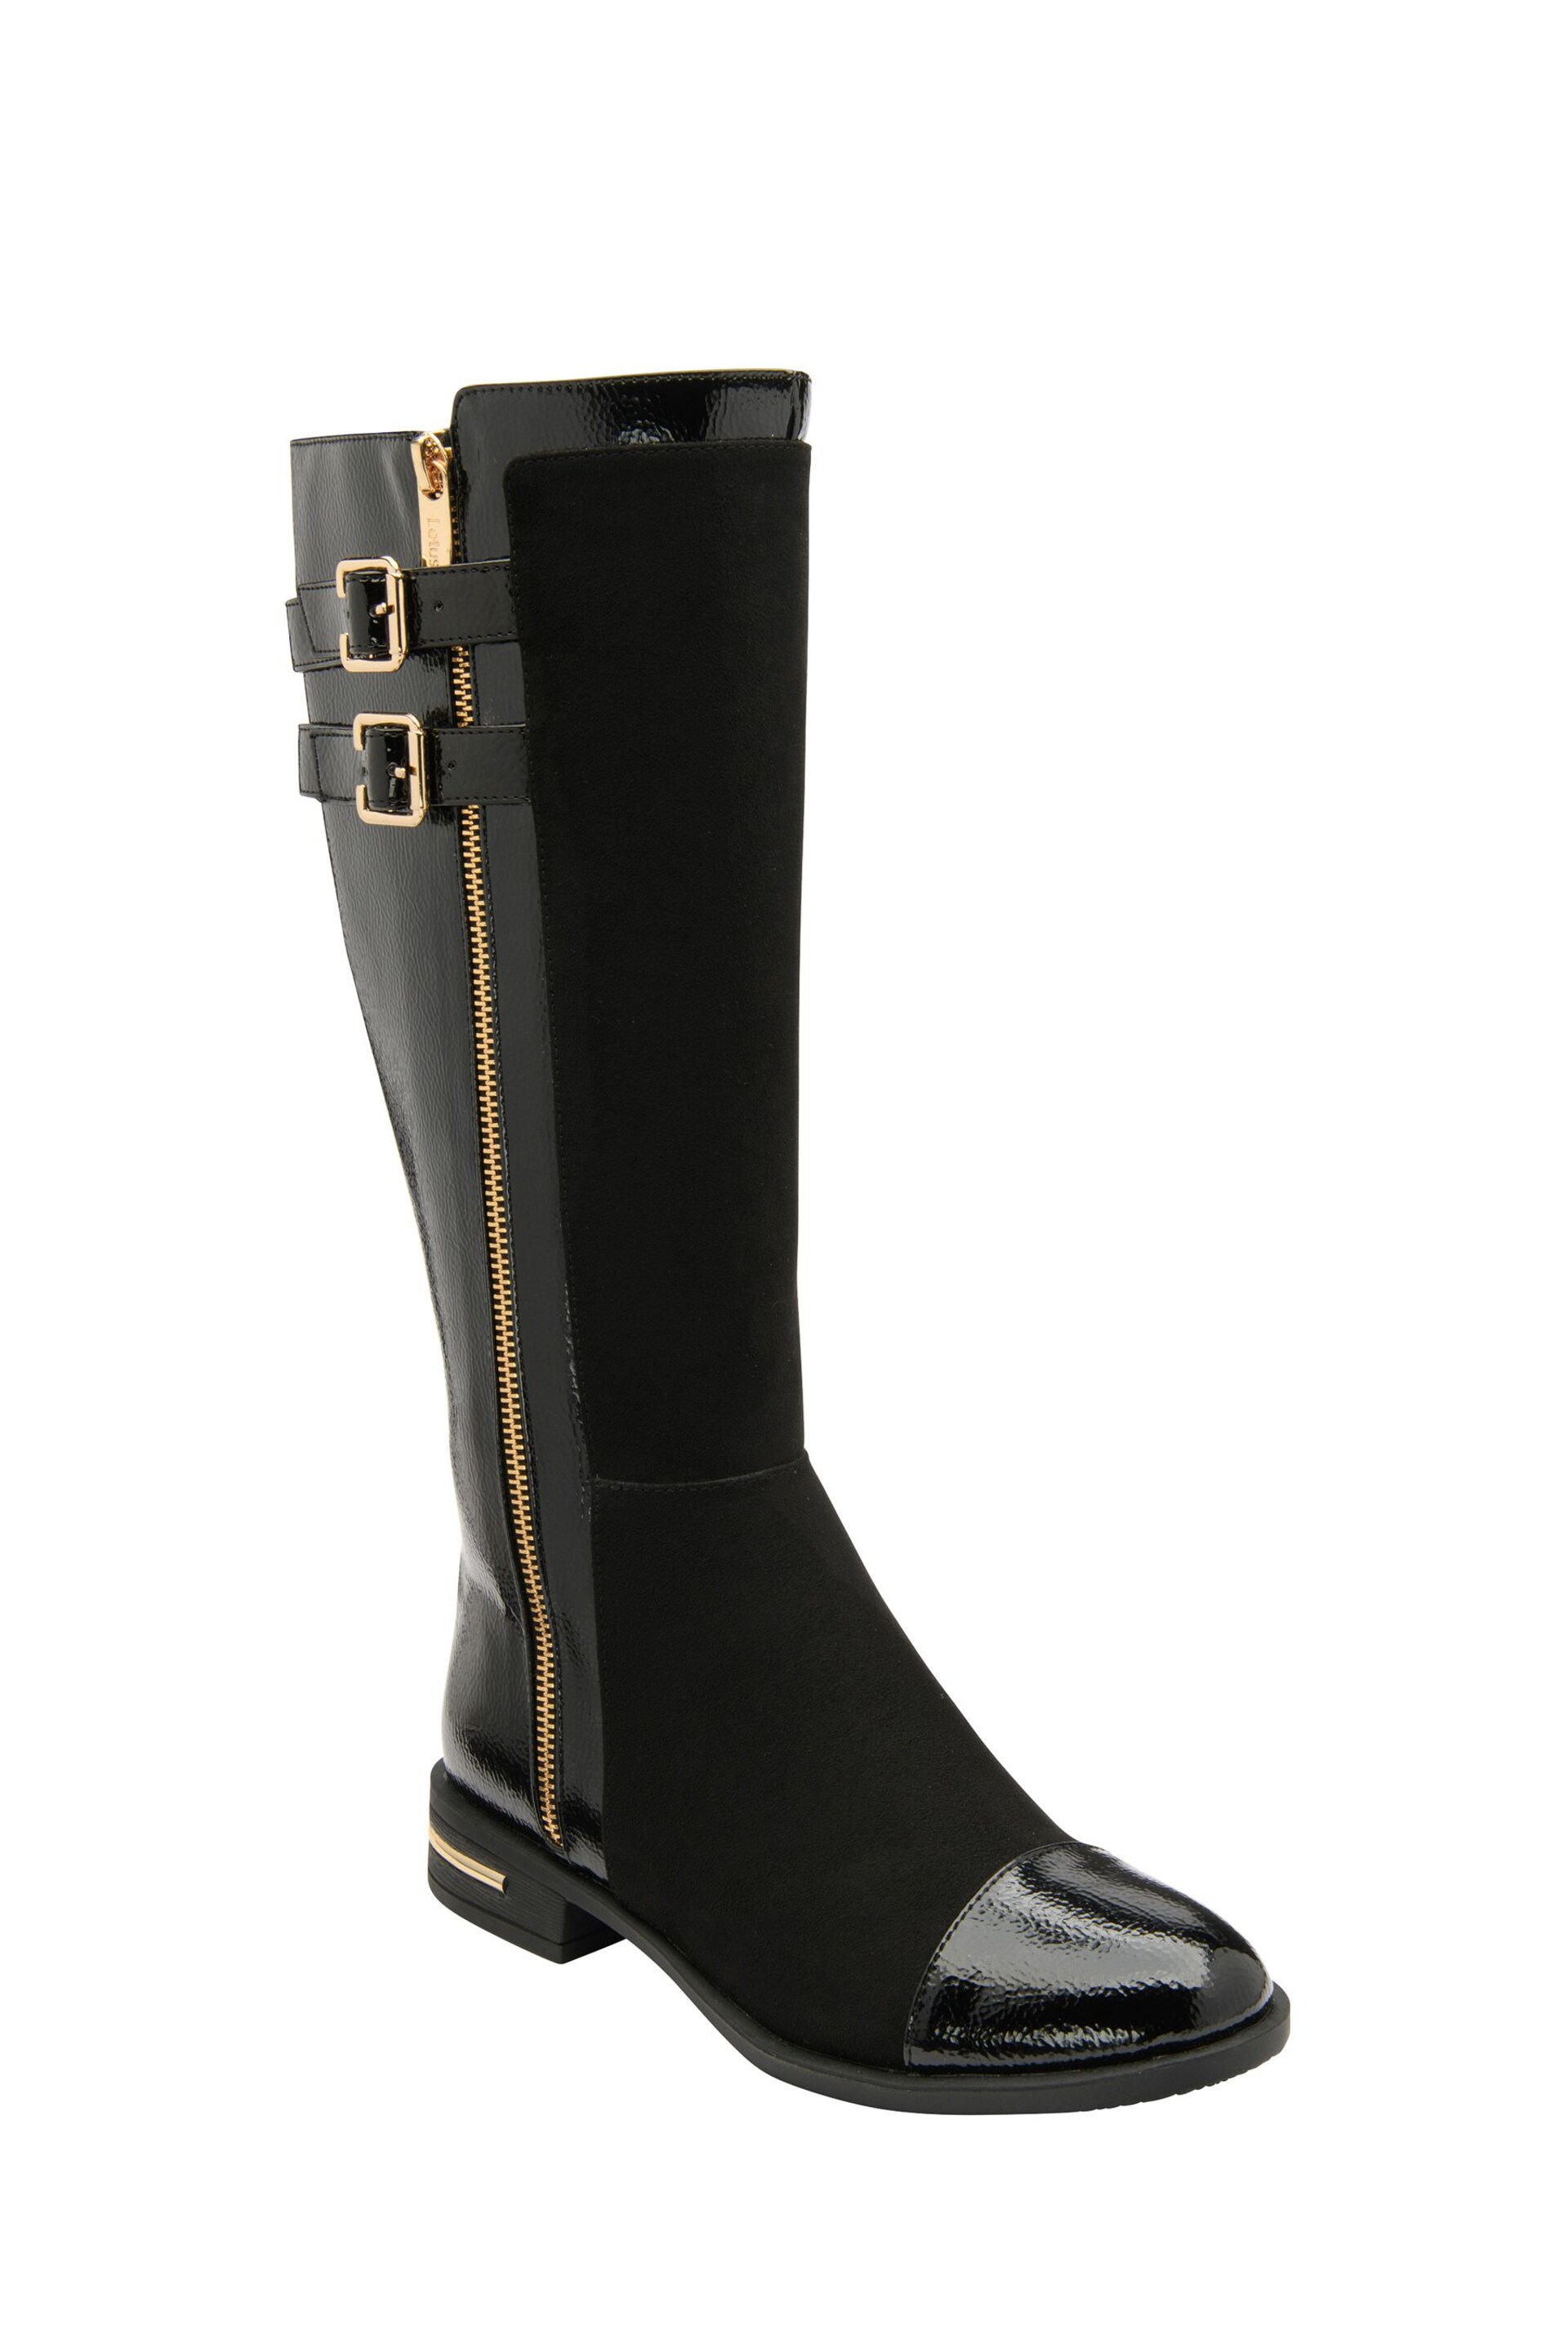 Lotus Black Textile & Patent Knee-High Boots - Image 1 of 4